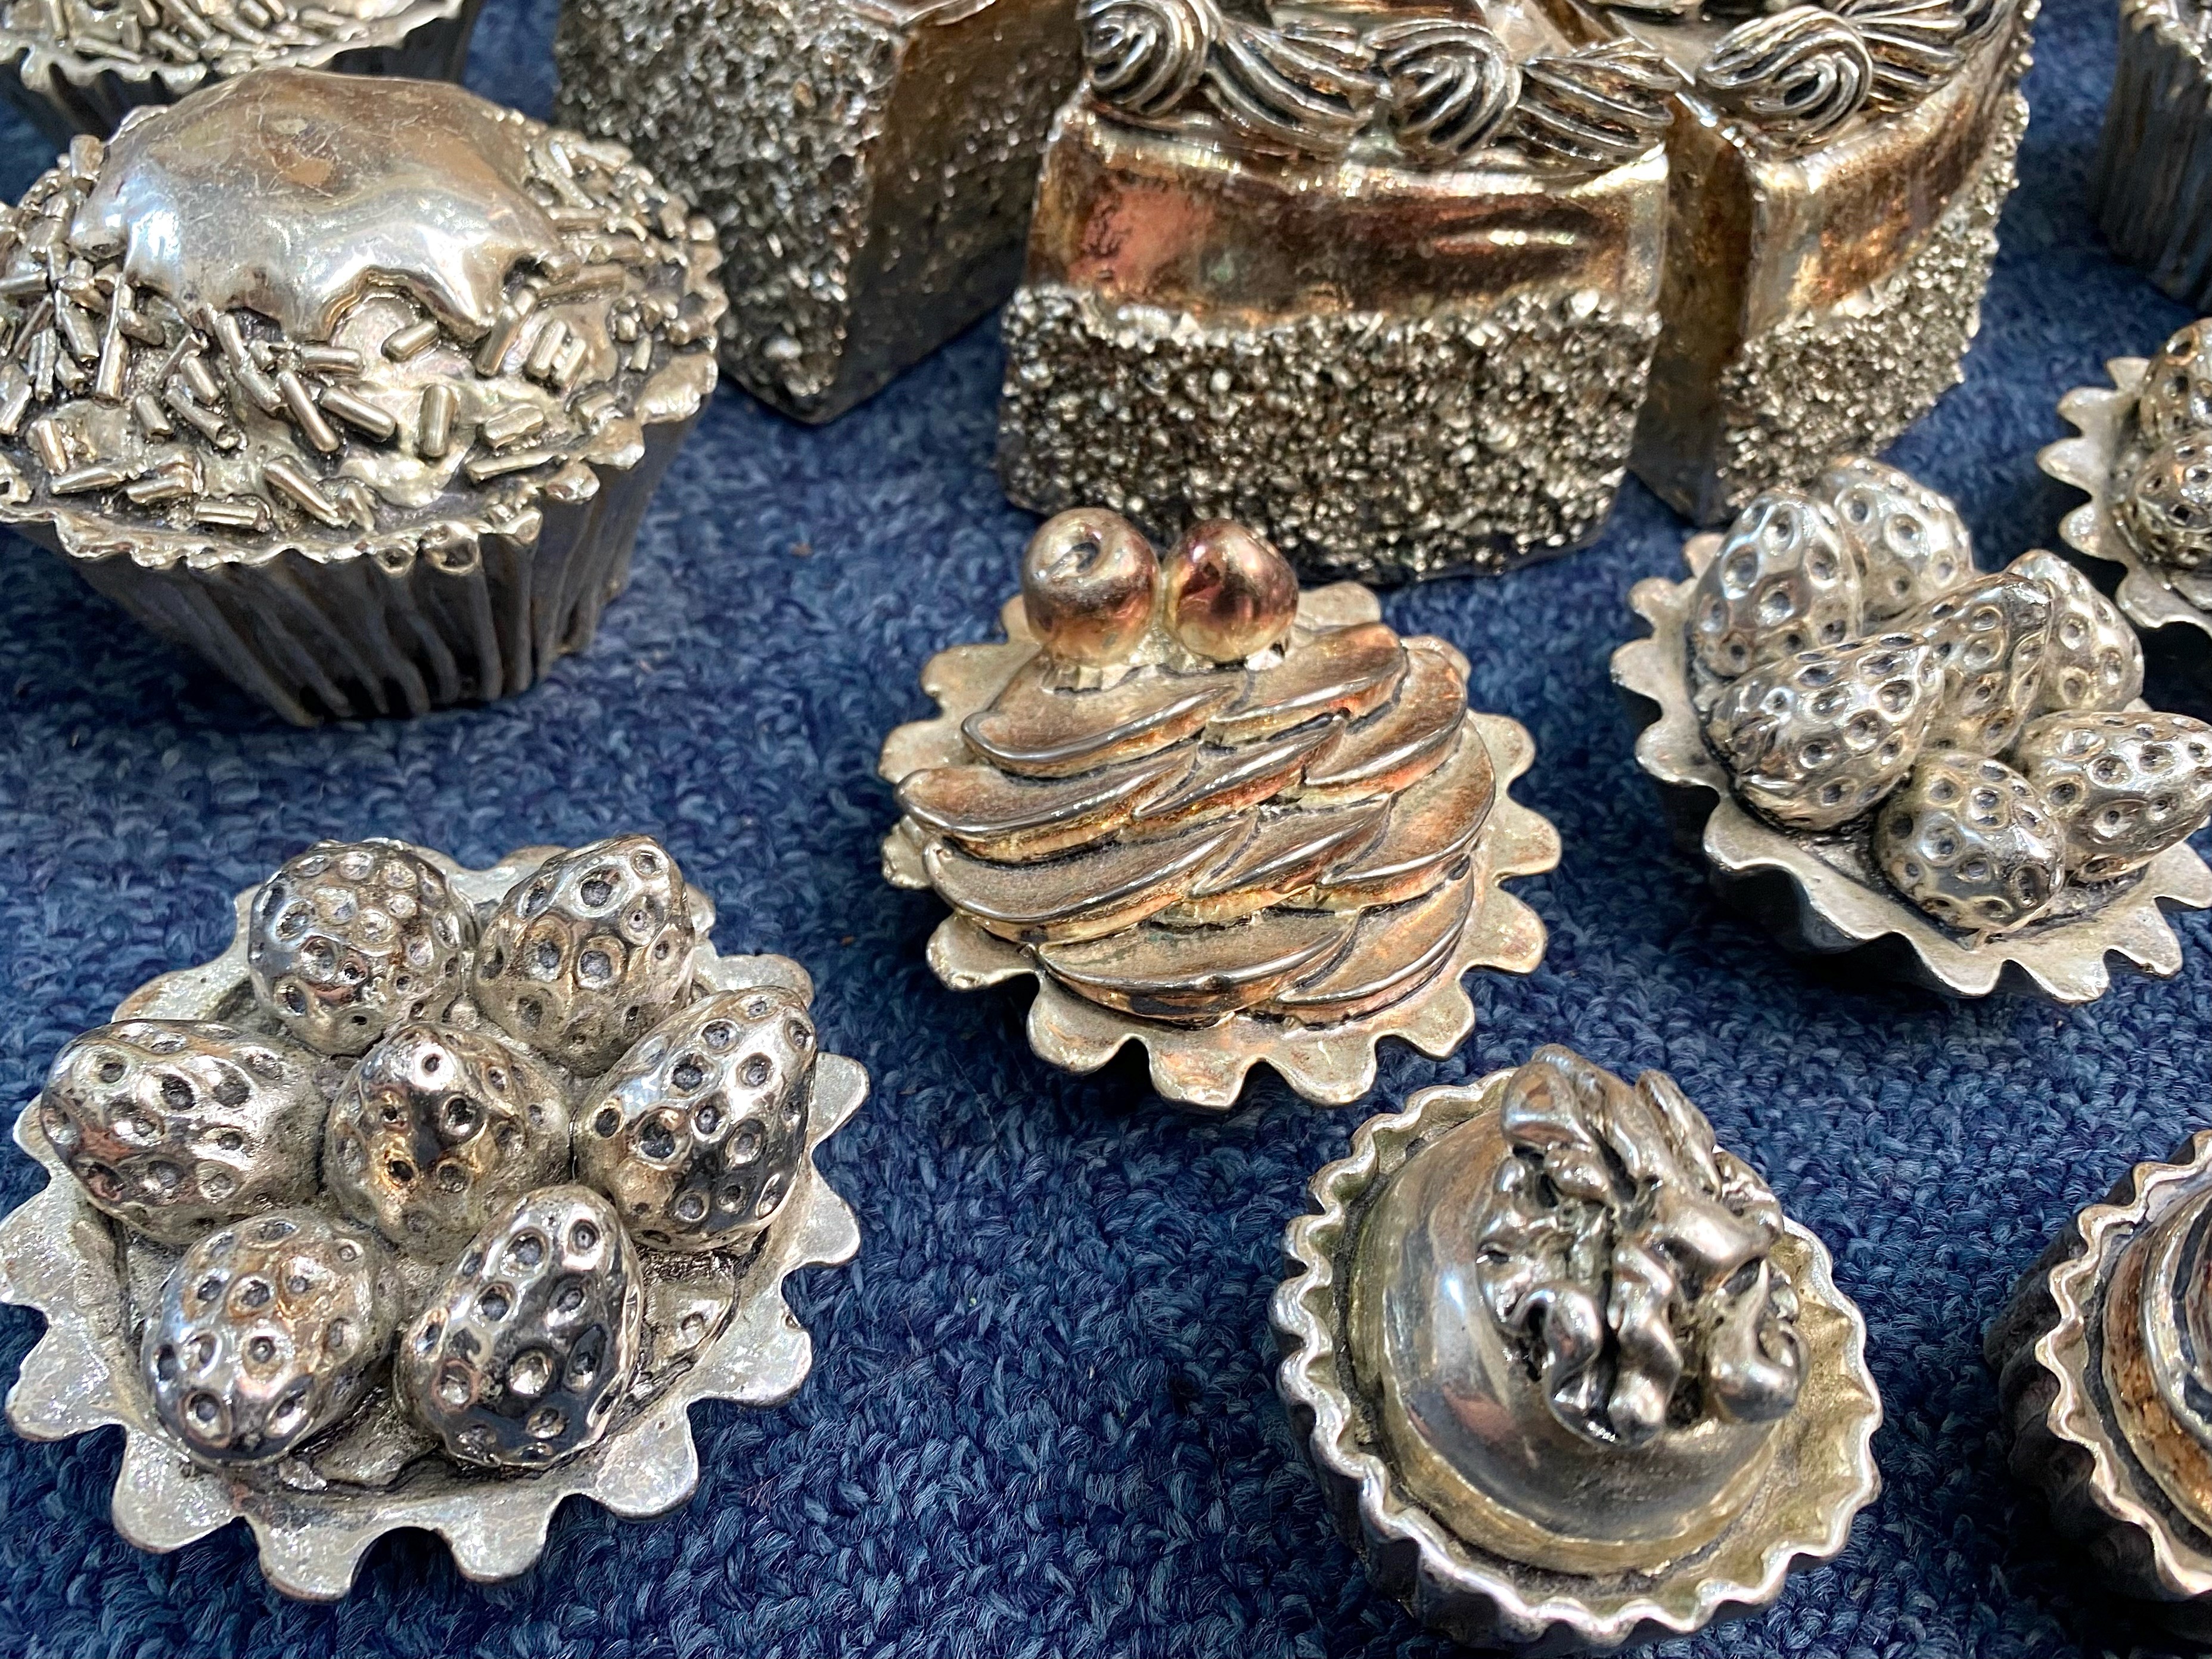 Collection of Silver Plated Cake Ornaments. Includes Cakes, Muffins, Slices of Cakes, Tart etc. - Image 3 of 3